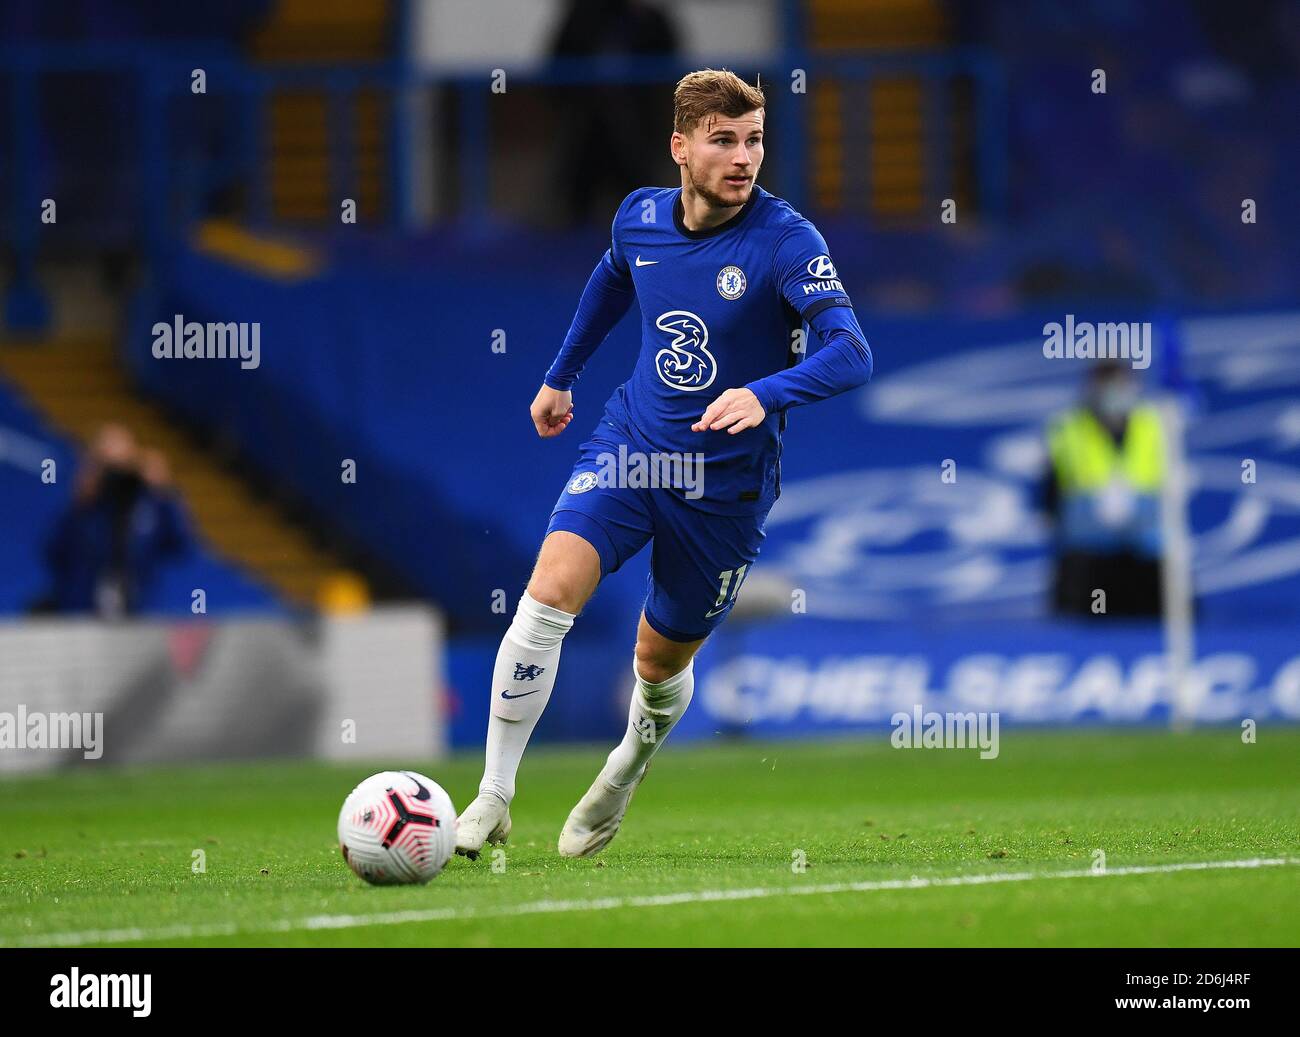 London, England, 17th Oct 2020  Timo Werner  Chelsea v Southampton.  Premier League. Credit : Mark Pain / Alamy Live News Stock Photo